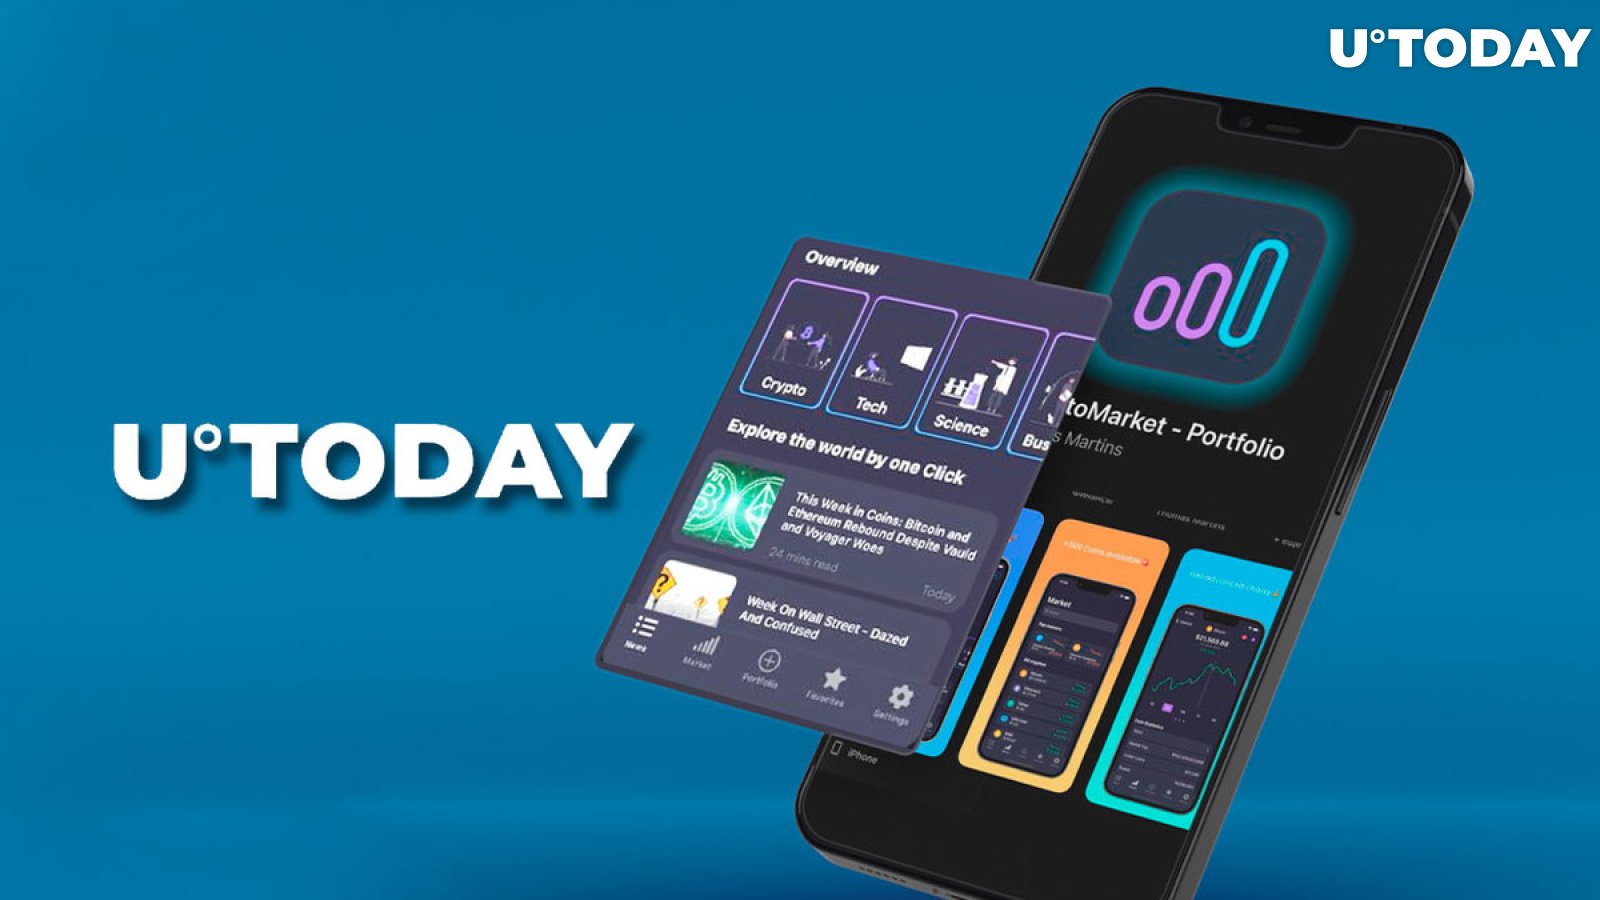 You Can Read U.Today Articles and Even More in CryptoMarket App